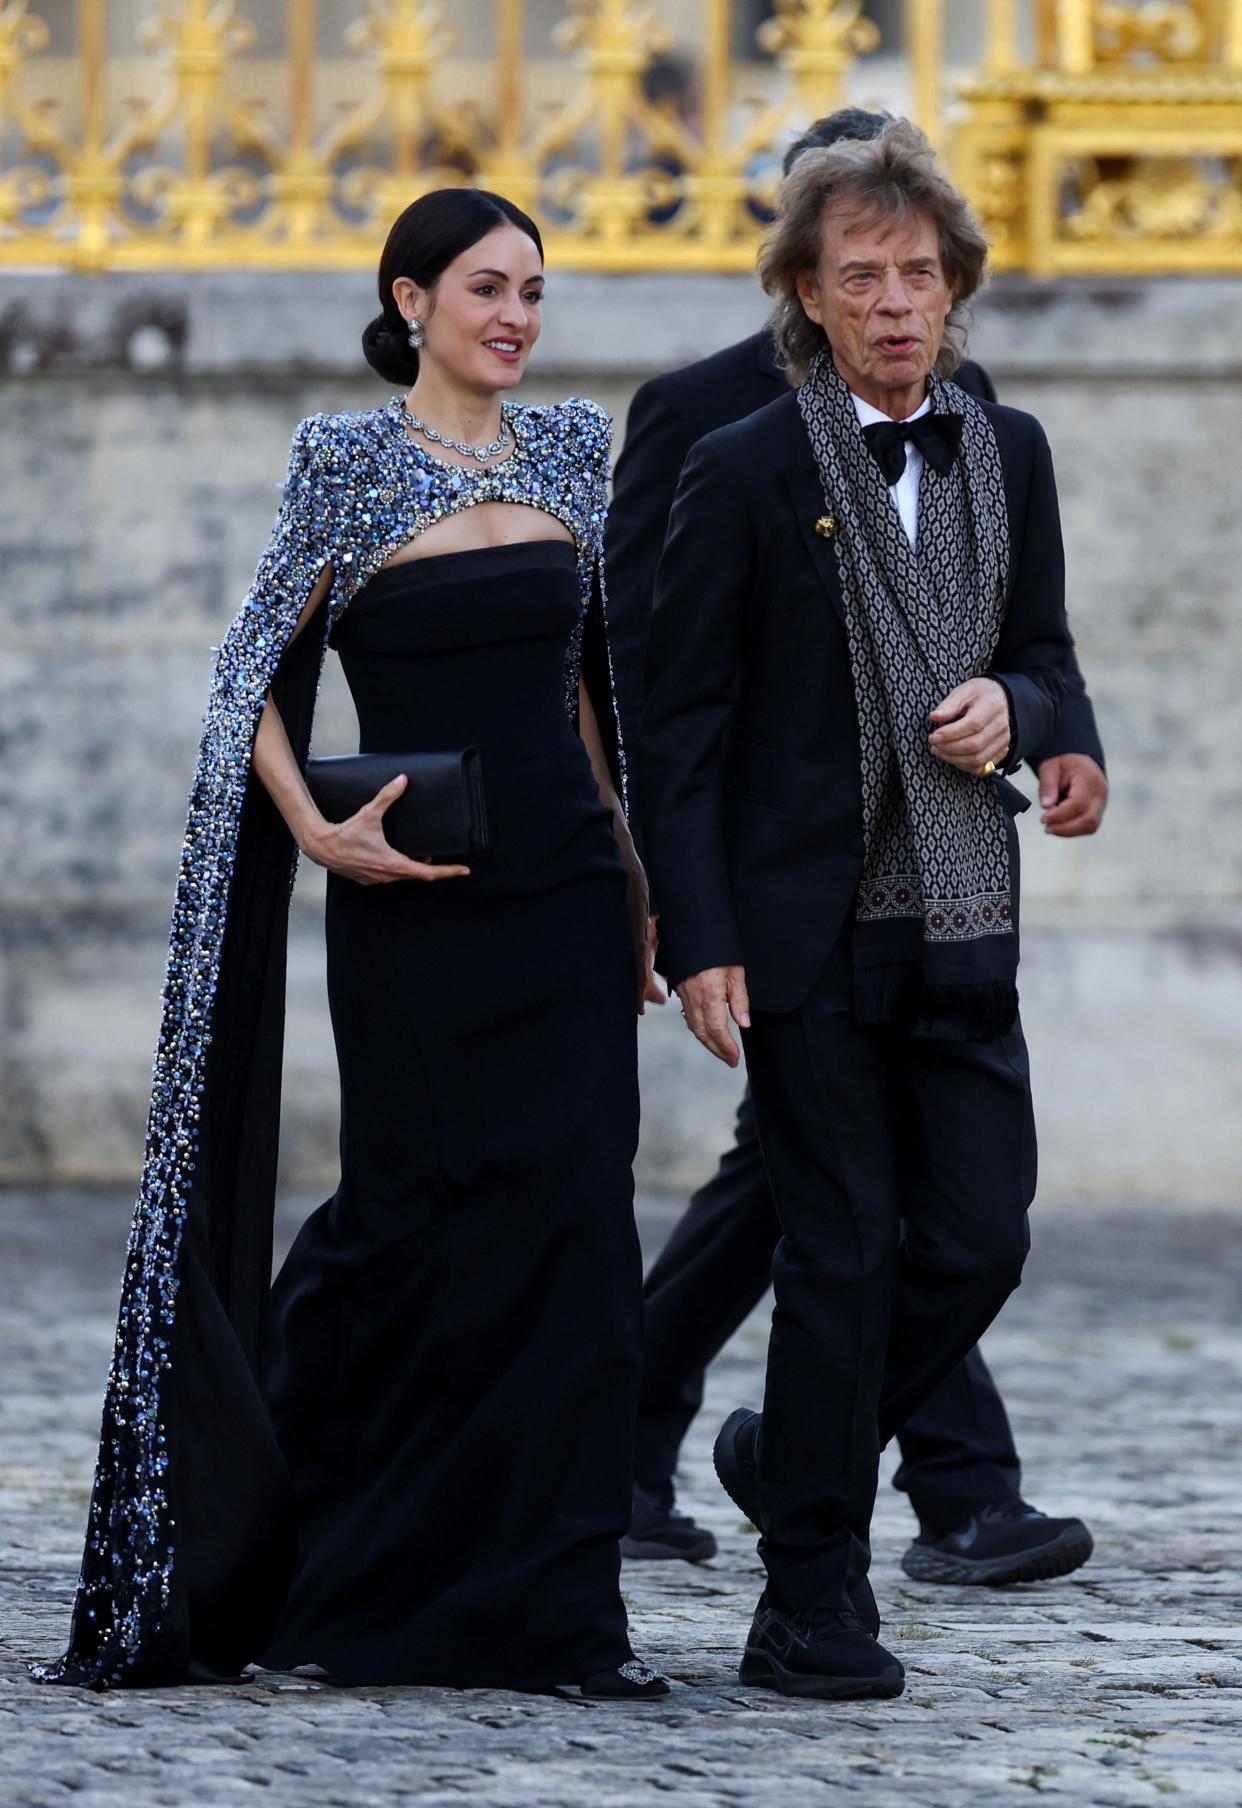 Rolling Stones band member Mick Jagger and Melanie Hamrick arrive to attend a state dinner in honor of Britain's King Charles and Queen Camilla at the Chateau de Versailles (REUTERS)